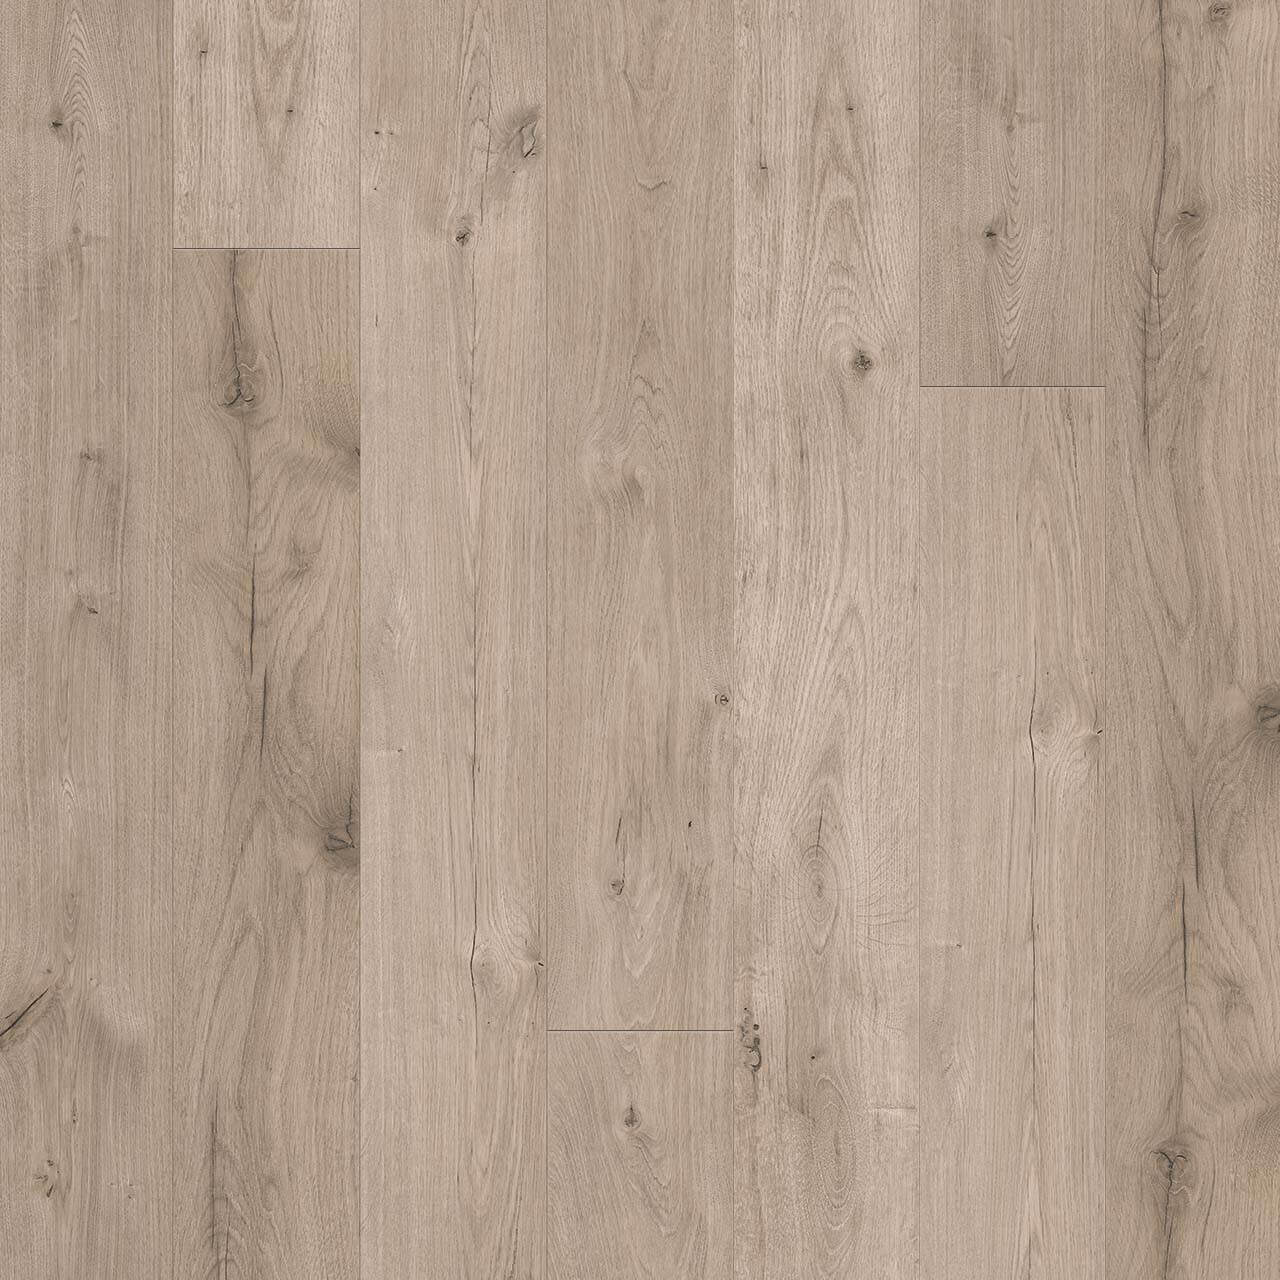 Engineered Floors - Wood Tech Collection - 7 in. x 54 in. - Sosebee Cove